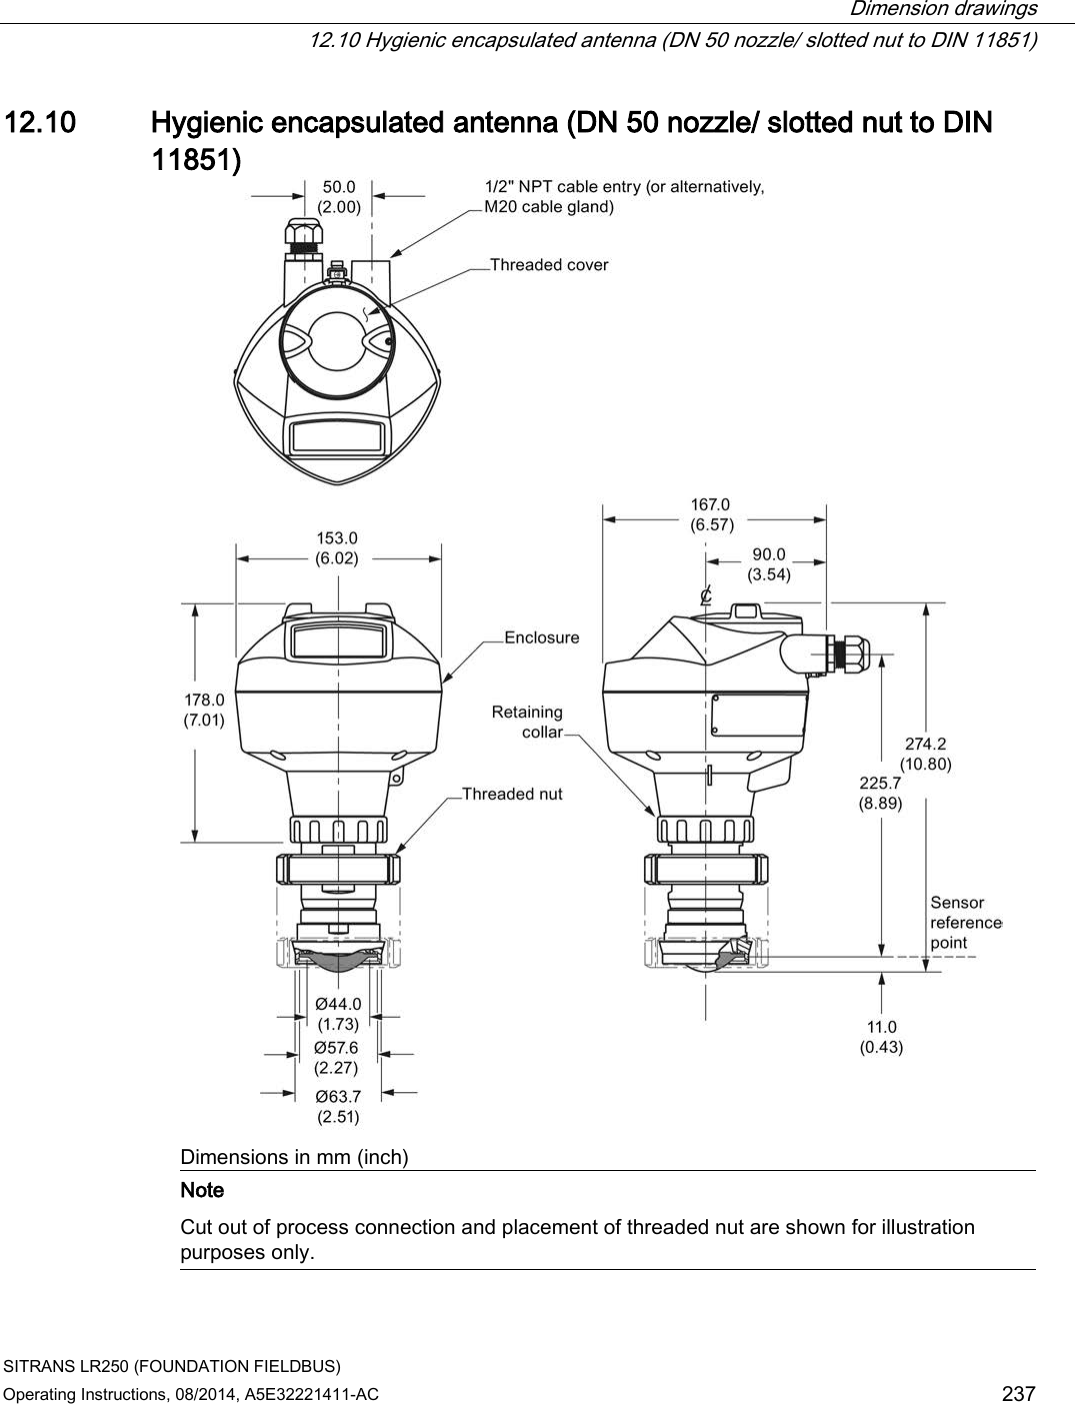  Dimension drawings  12.10 Hygienic encapsulated antenna (DN 50 nozzle/ slotted nut to DIN 11851) SITRANS LR250 (FOUNDATION FIELDBUS) Operating Instructions, 08/2014, A5E32221411-AC 237 12.10 Hygienic encapsulated antenna (DN 50 nozzle/ slotted nut to DIN 11851)  Dimensions in mm (inch)  Note Cut out of process connection and placement of threaded nut are shown for illustration purposes only.  